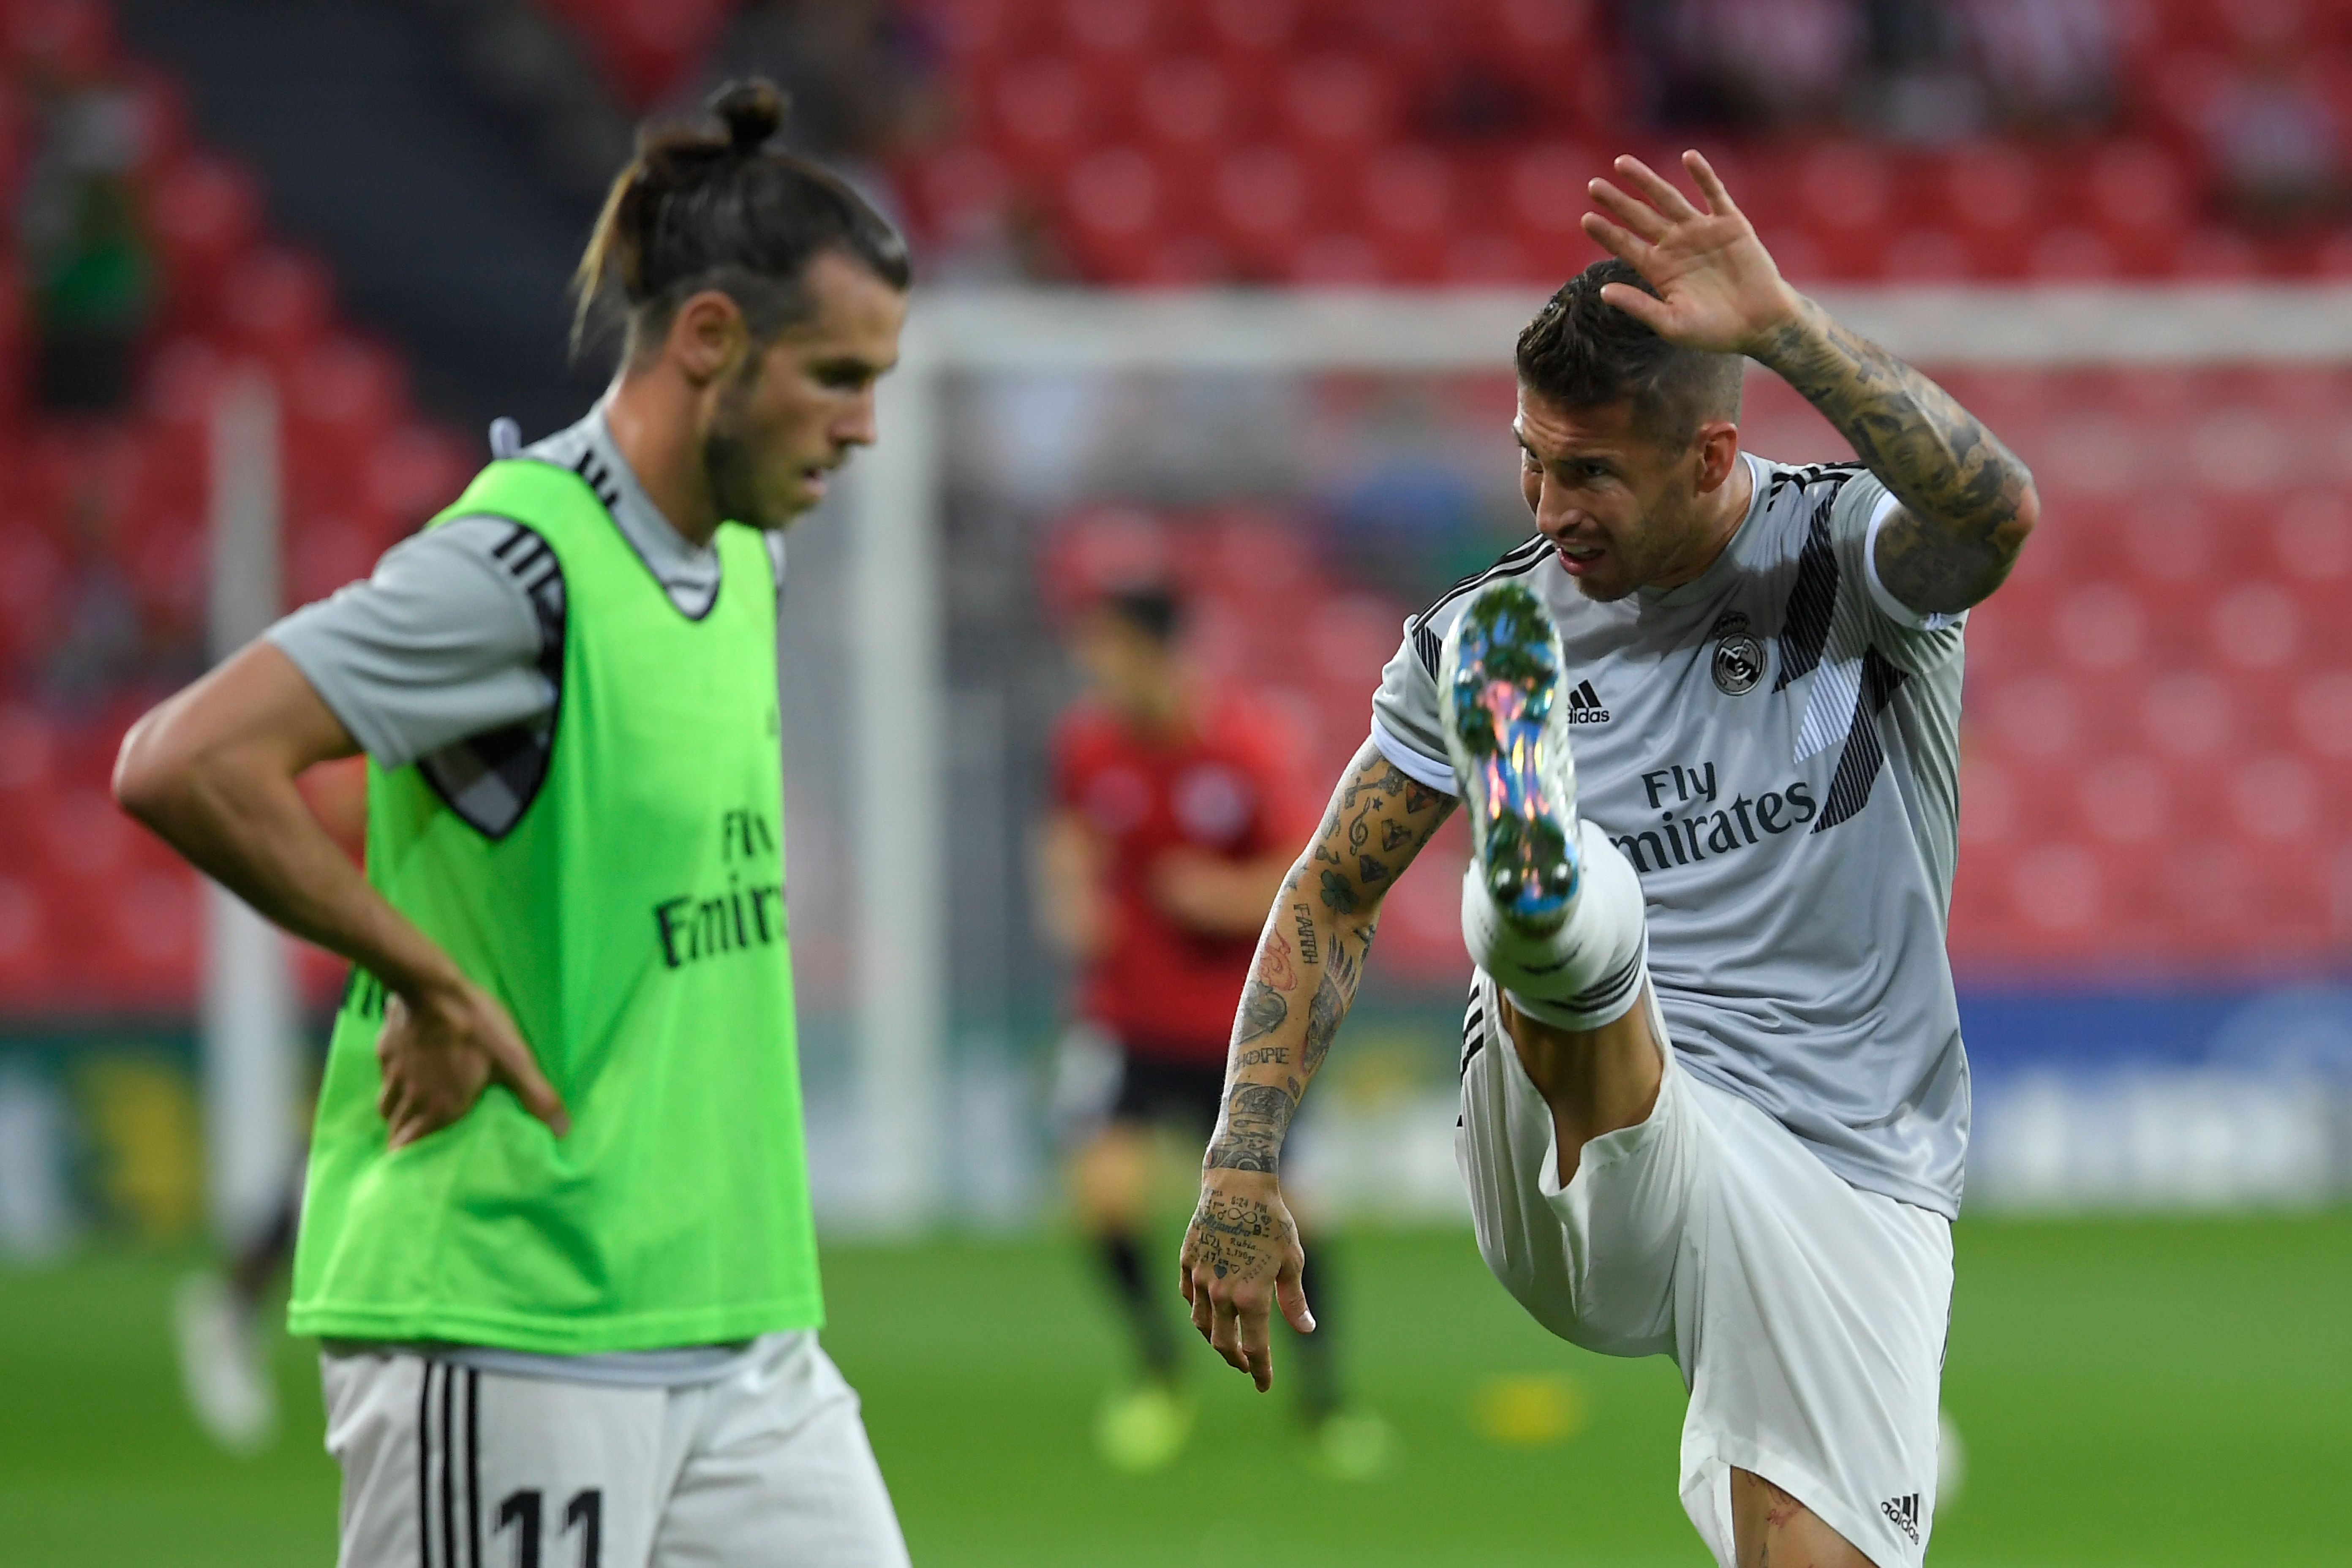 Real Madrid's Welsh forward Gareth Bale (L) and Real Madrid's Spanish defender Sergio Ramos warm up before the Spanish league football match between Athletic Club Bilbao and Real Madrid CF at the San Mames stadium in Bilbao on September 15, 2018. (Photo by LLUIS GENE / AFP)        (Photo credit should read LLUIS GENE/AFP/Getty Images)